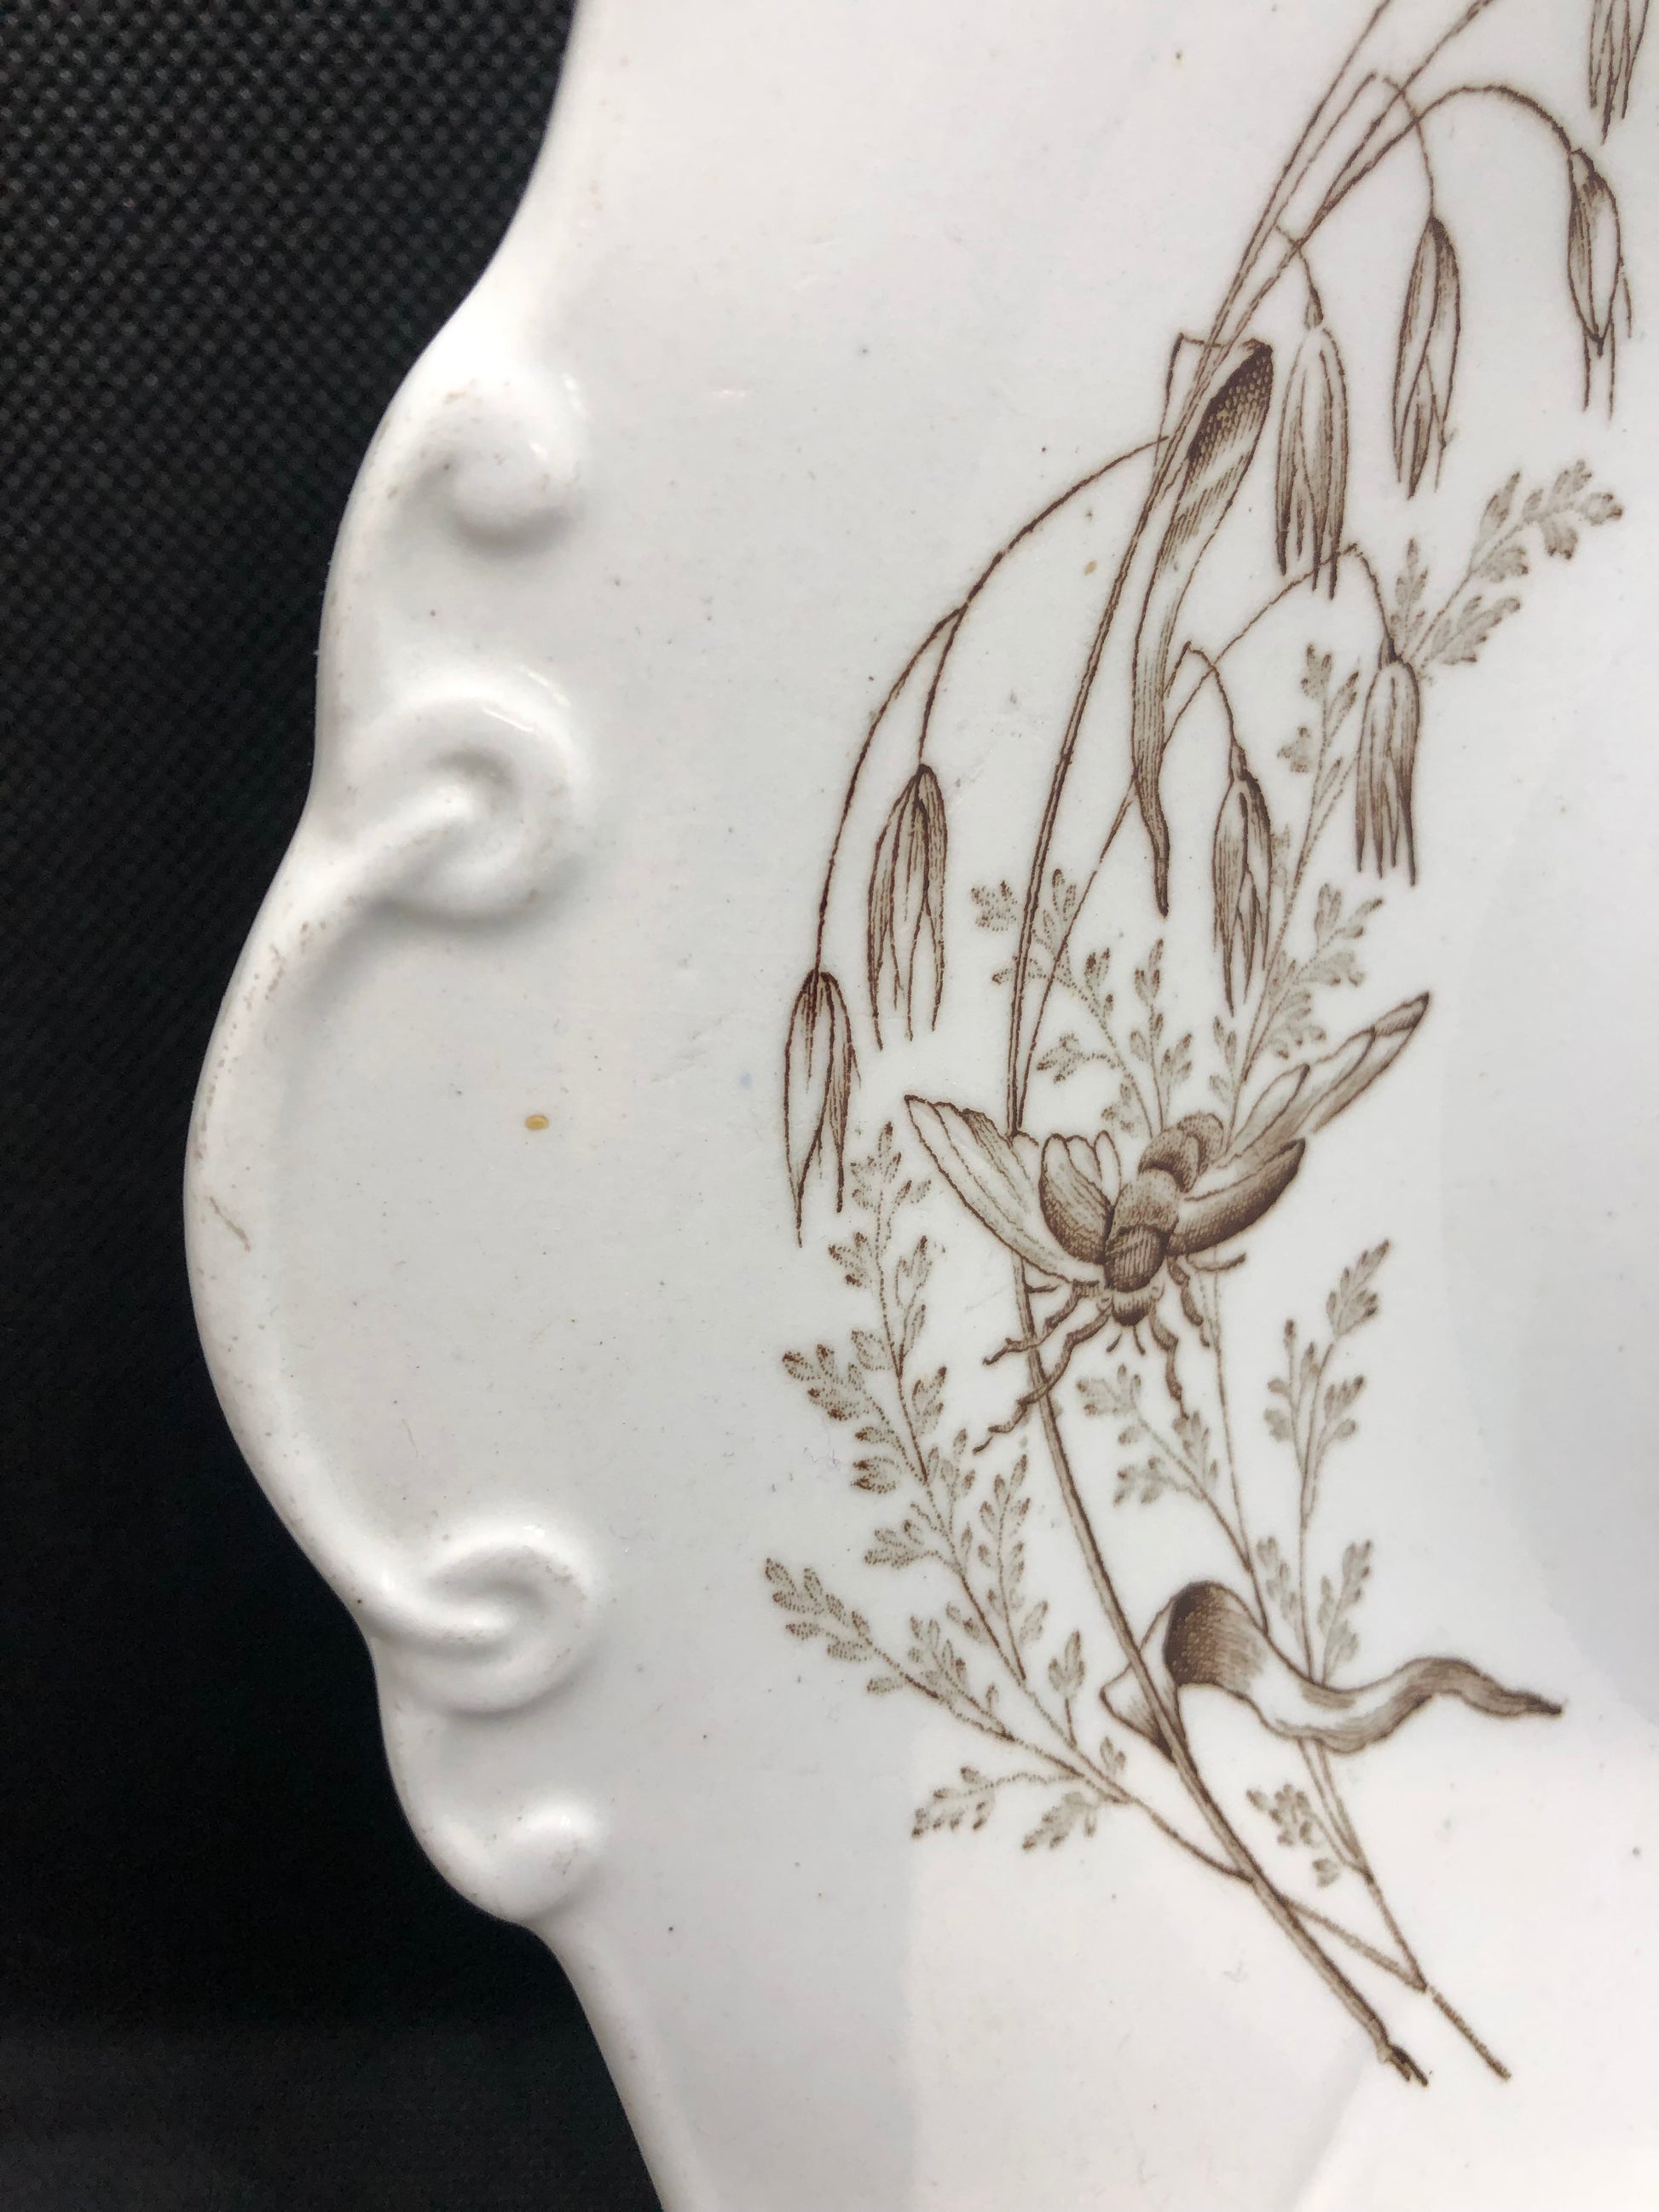 Porcelain plate antique Ashworth Bros Victoria Pattern Ironstone insect 